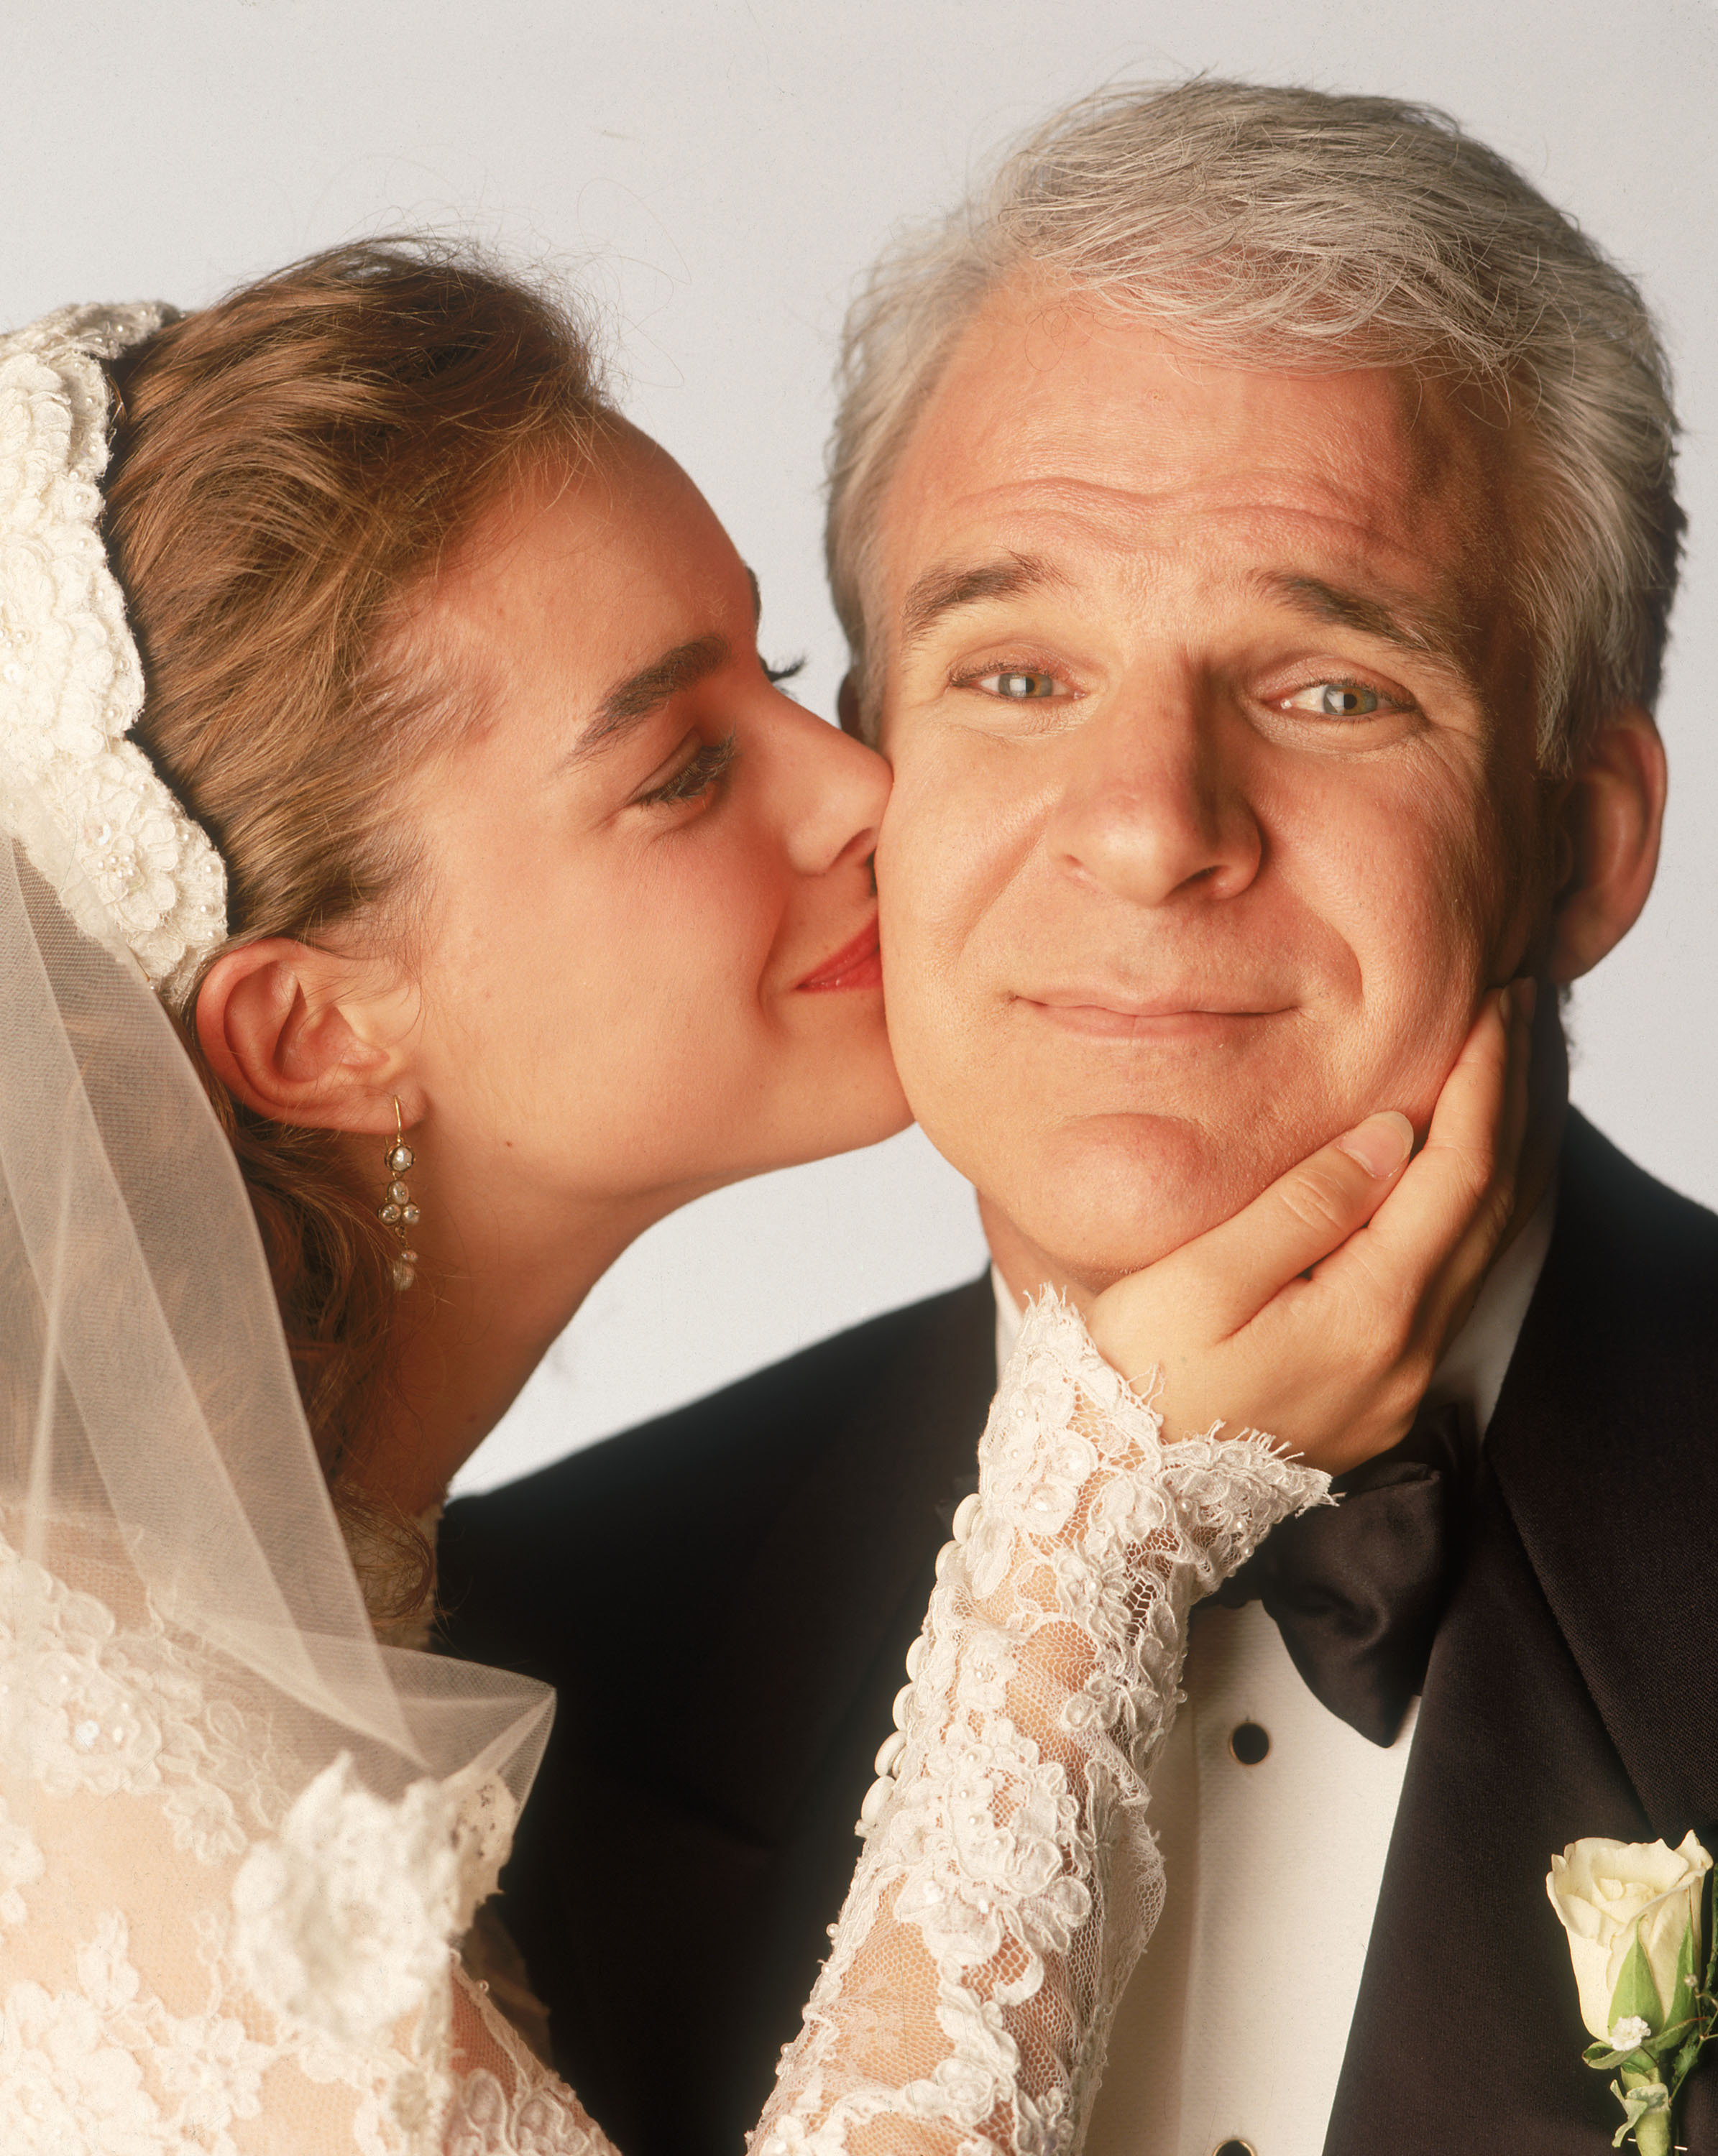 father-of-the-bride-steve-martin.jpg